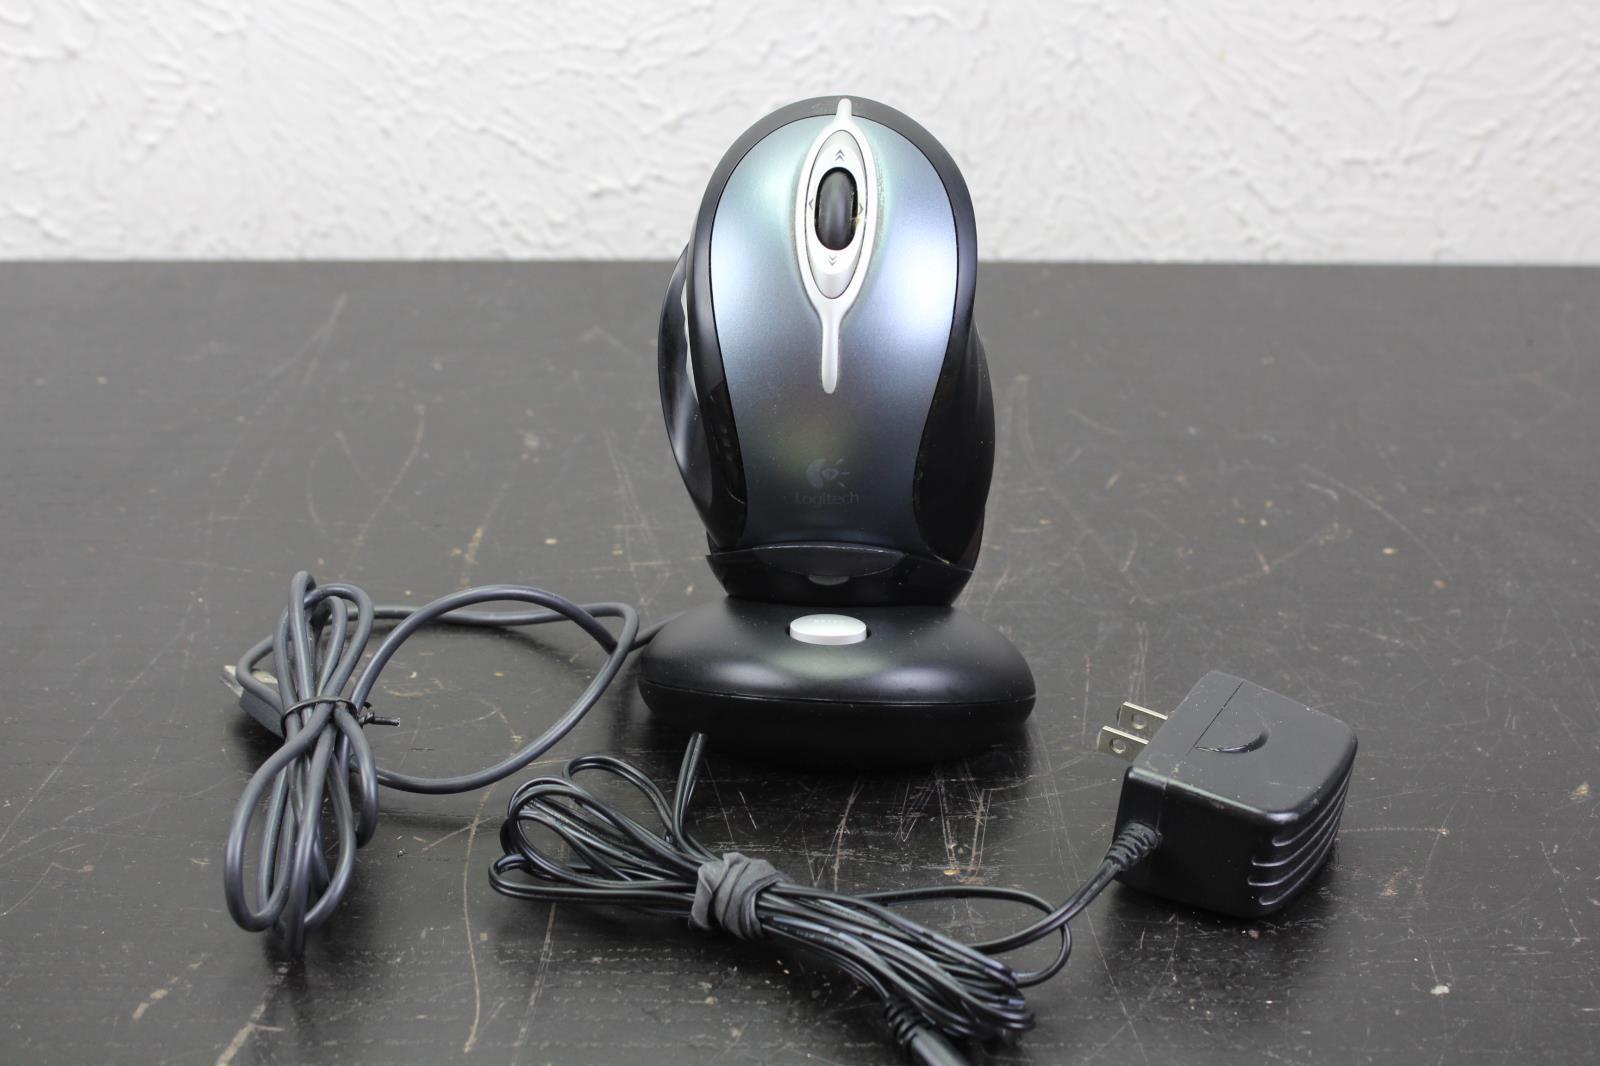 Logitech MX1000 Wireless Laser Mouse M-RAG97 & Receiver/Charger Dock+AC Adapter